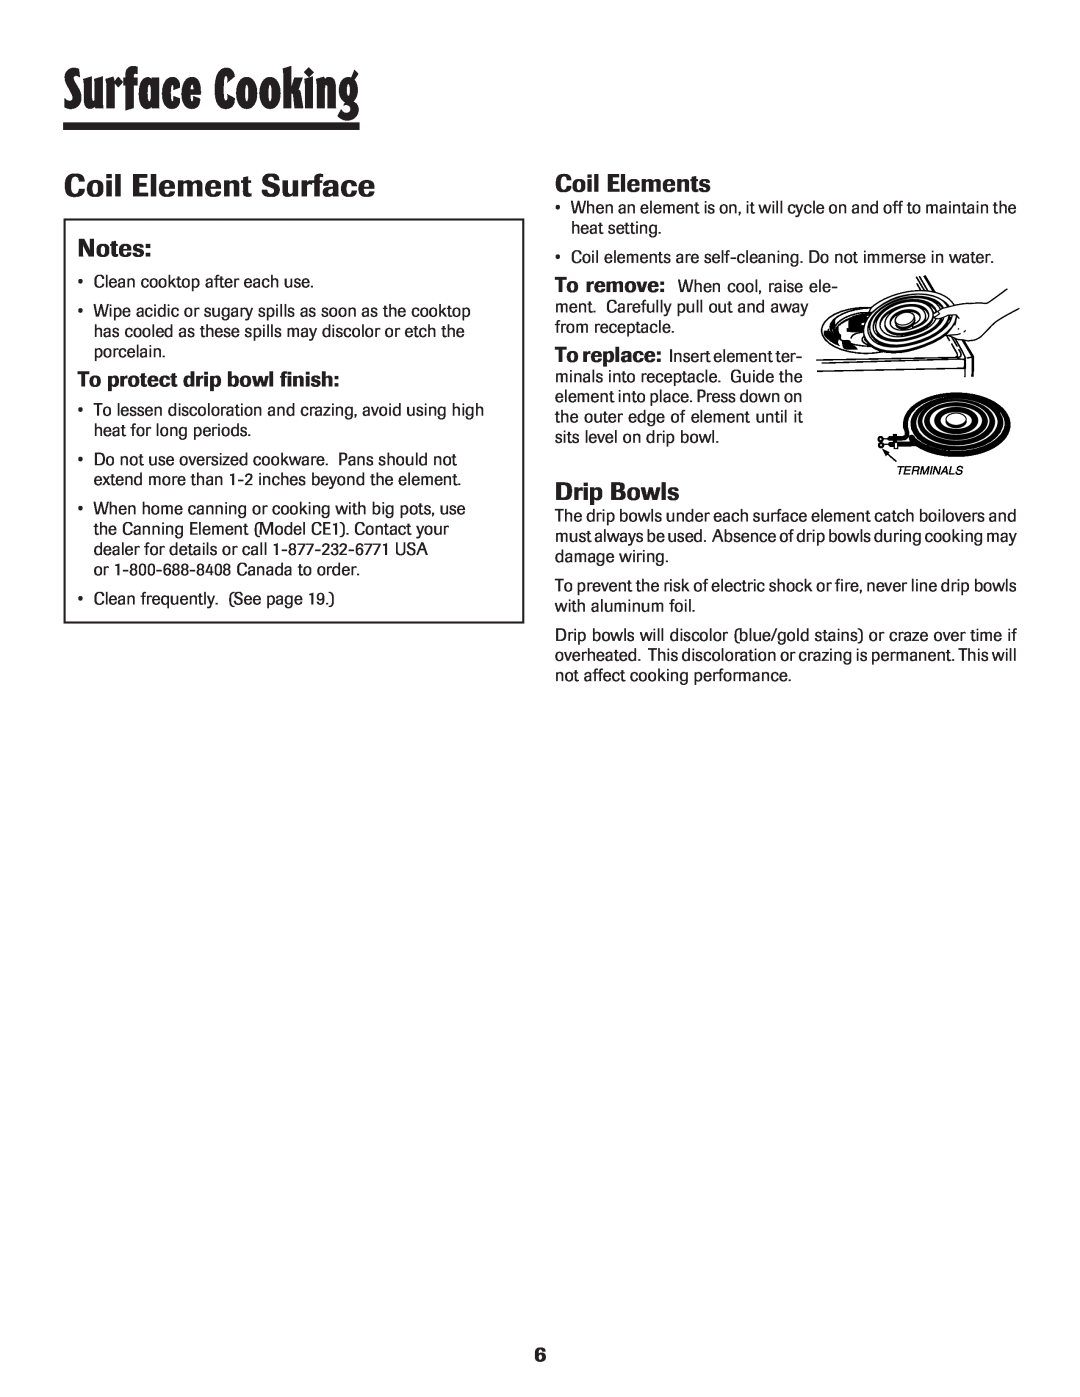 Maytag Oven warranty Coil Element Surface, Notes, Coil Elements, Drip Bowls, To protect drip bowl finish, Surface Cooking 